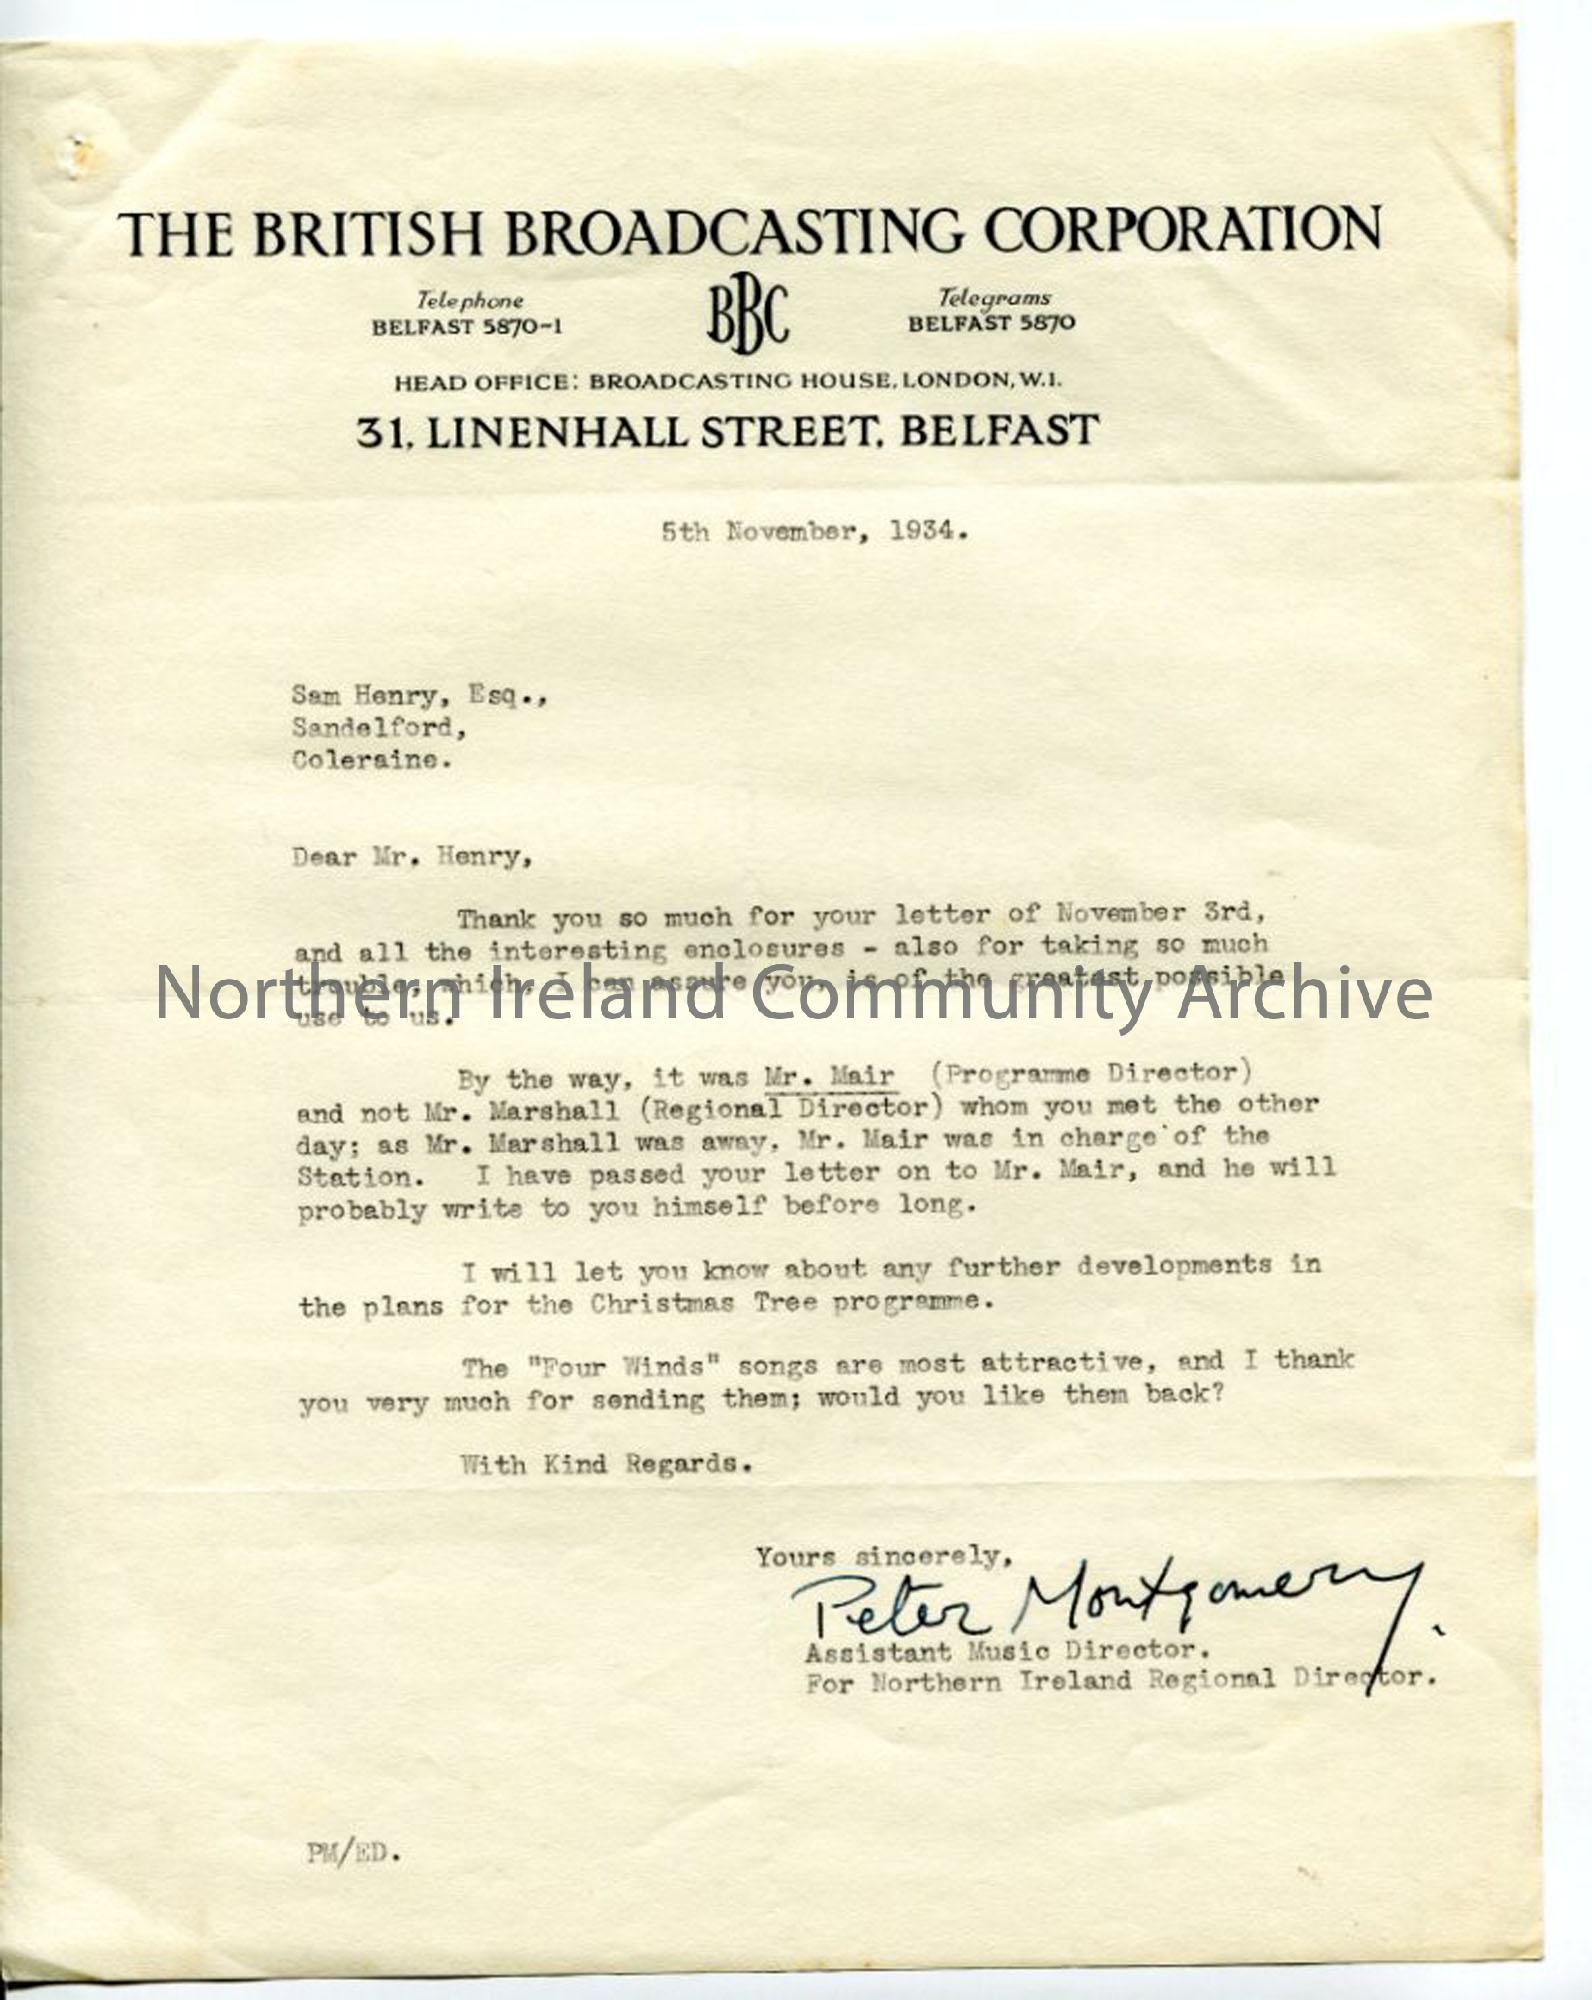 Letter from Peter Montgomery of the BBC, dated 5.11.1934